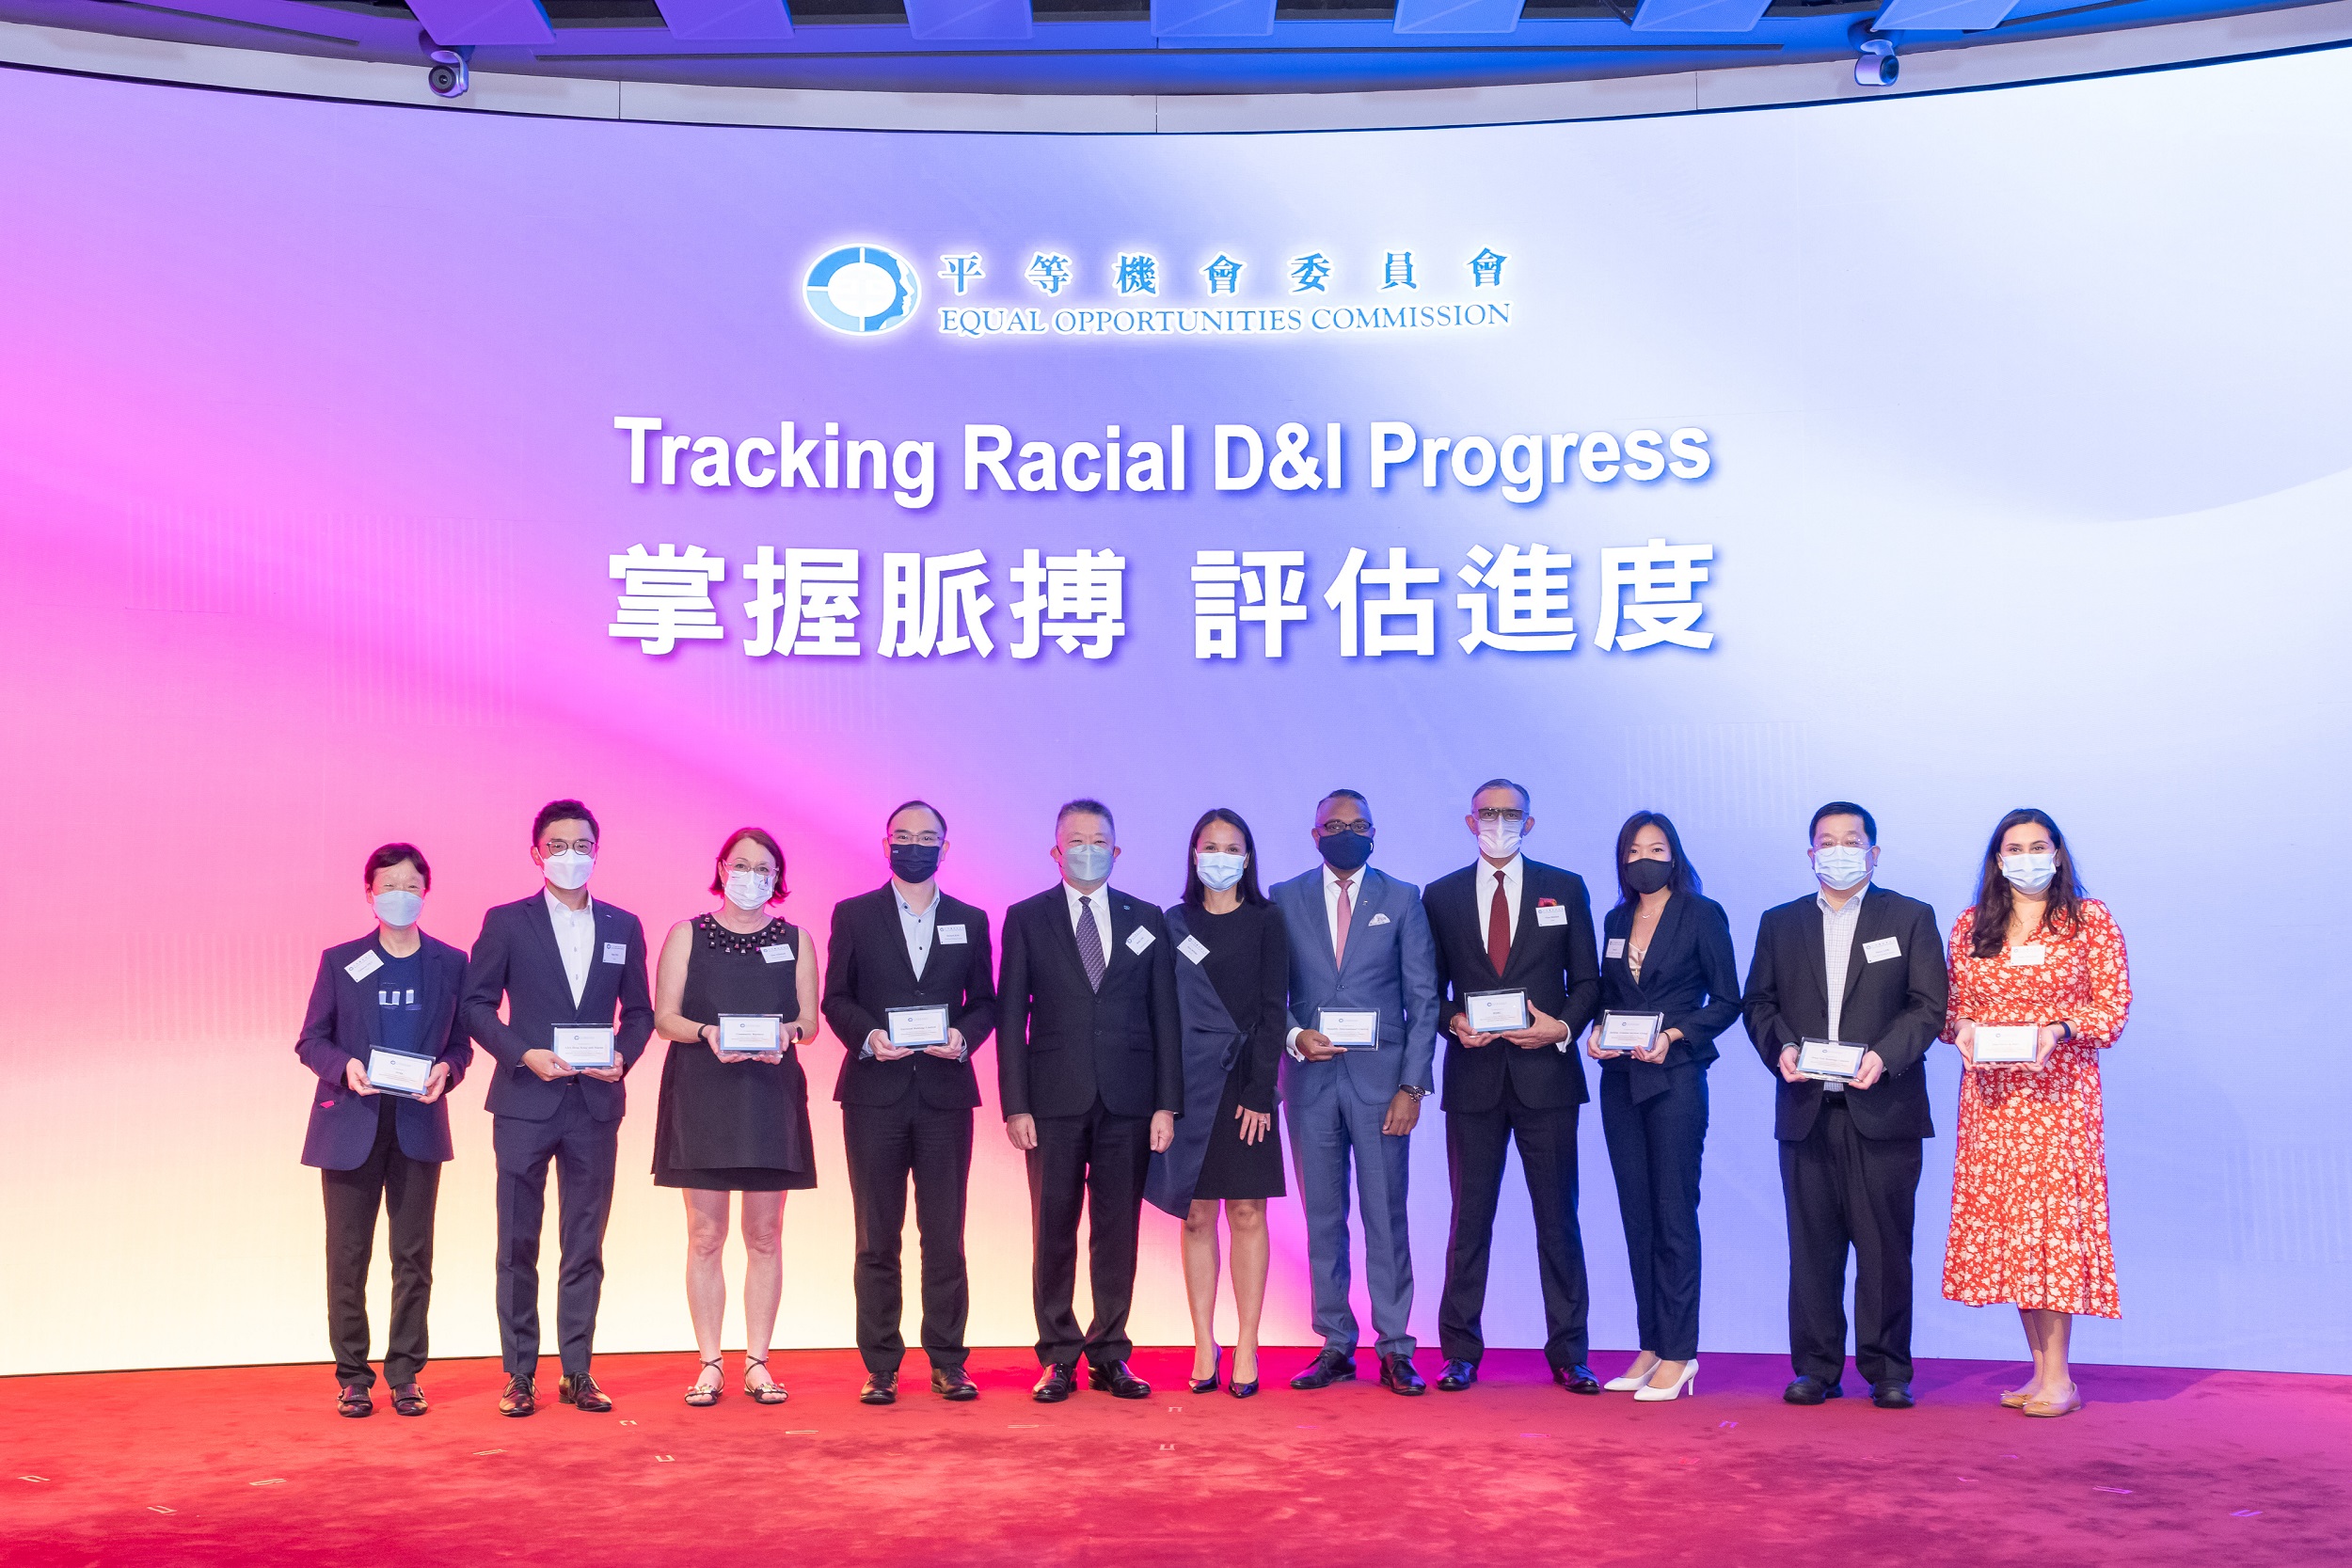 Picture with the “Advanced Annual Review Form” Test-run Charter Signatories, including Arup, AXA Hong Kong and Macau, Community Business, Fairwood Holdings Limited, HSBC, Jardine Aviation Services Group, Manulife (International) Limited, Shun Tak Holdings Limited, John Swire & Sons (H.K.) Limited.